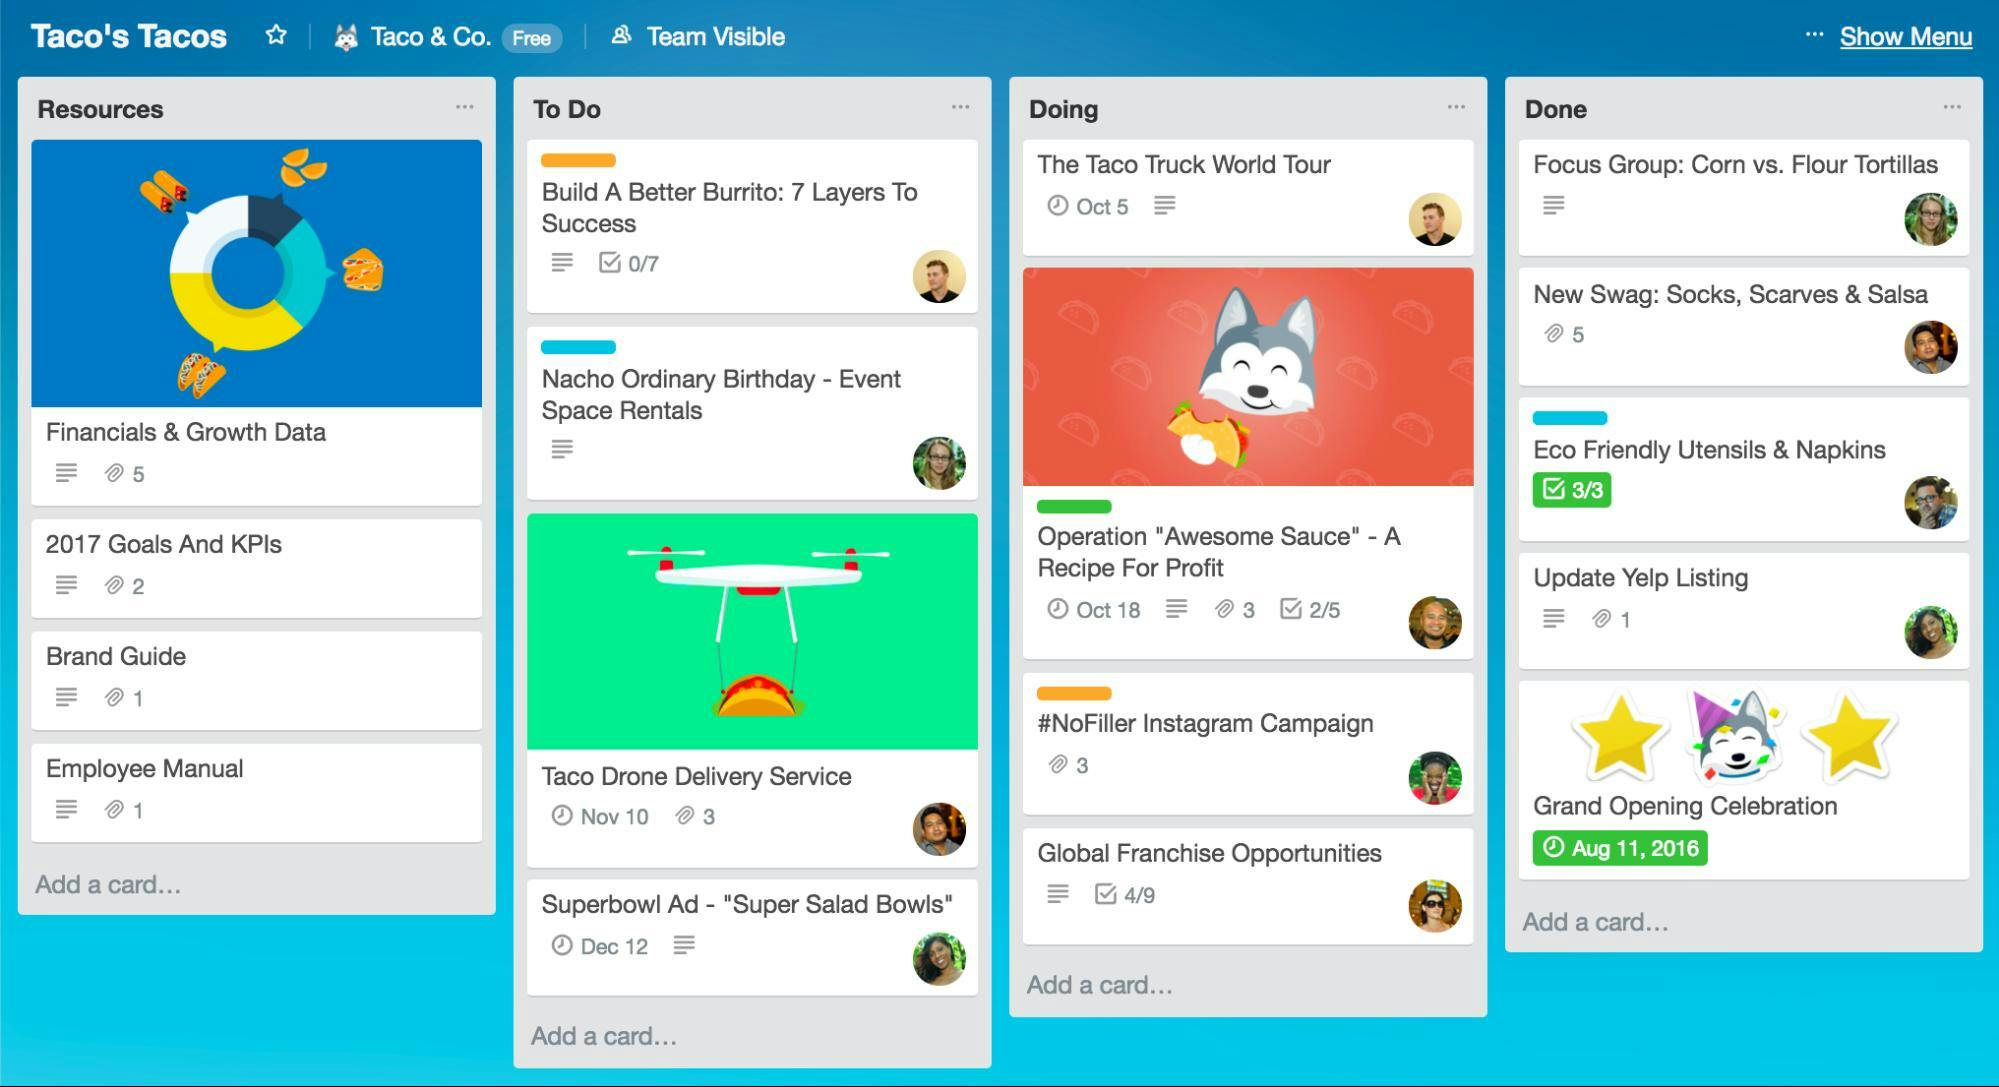 Trello Game Pages - Try Hard Guides